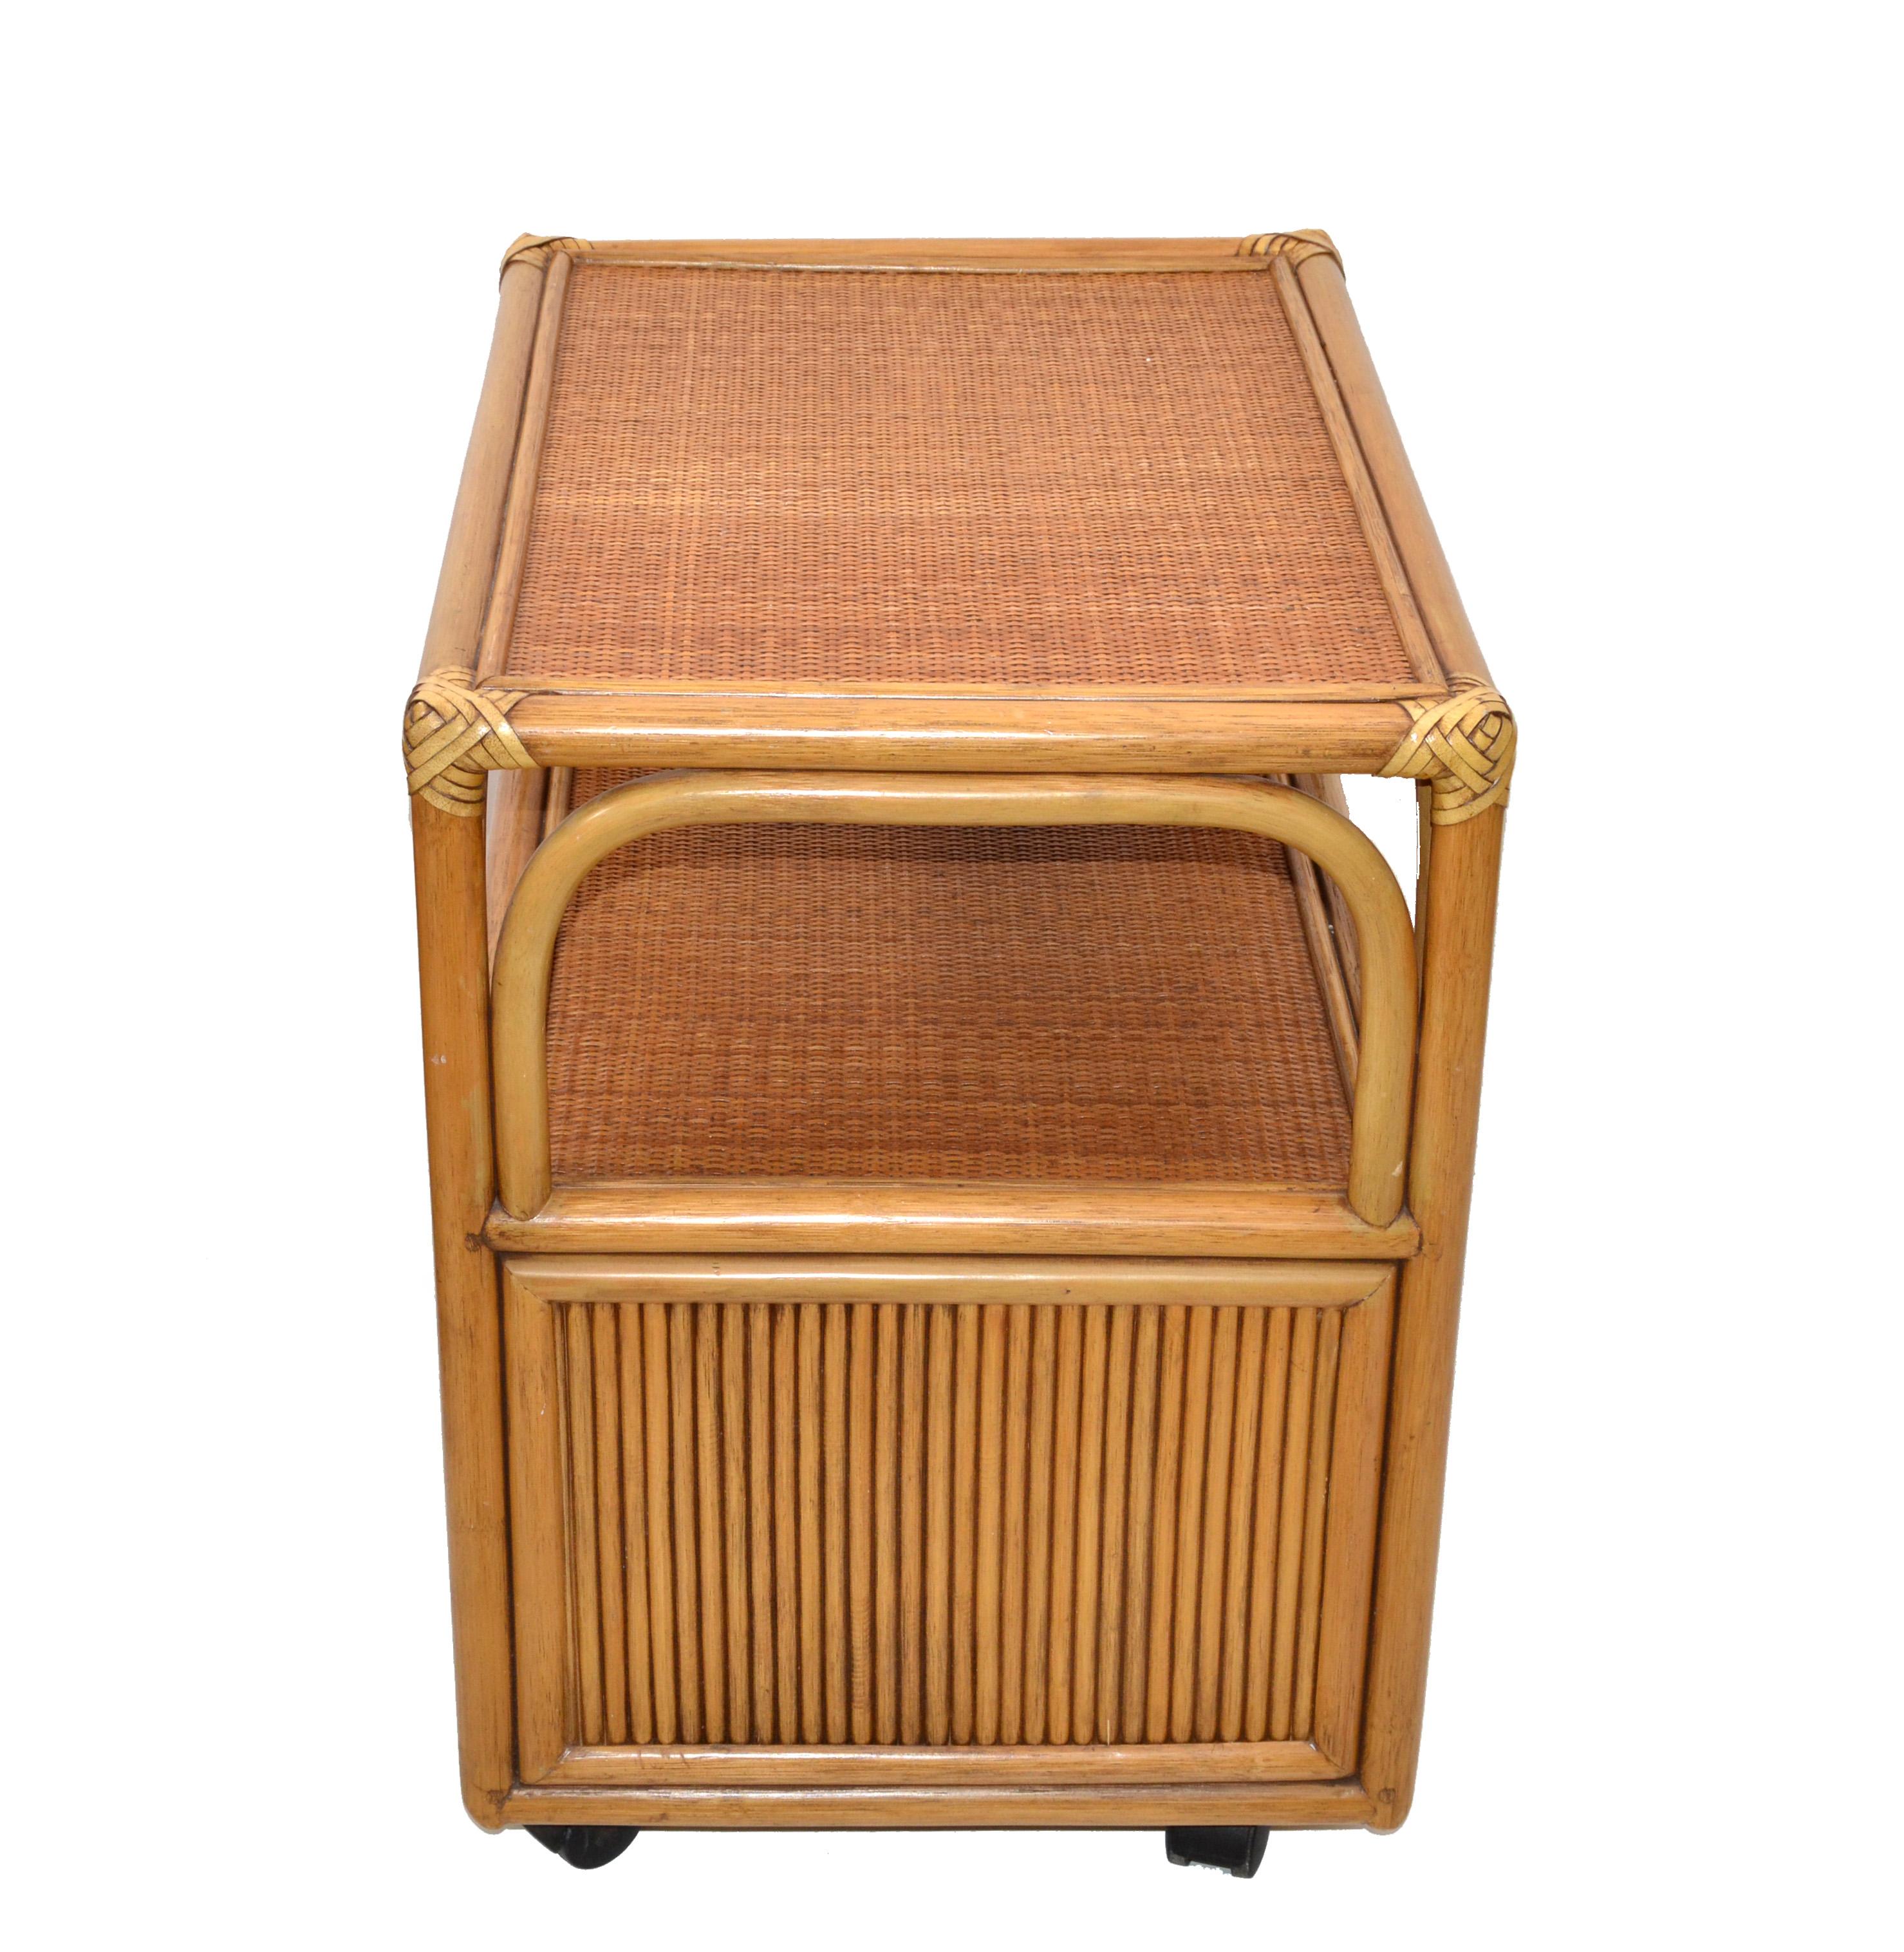 American 70s Mid-Century Modern Bamboo Handwoven Leather Corners Cane Top Cart Side Table For Sale